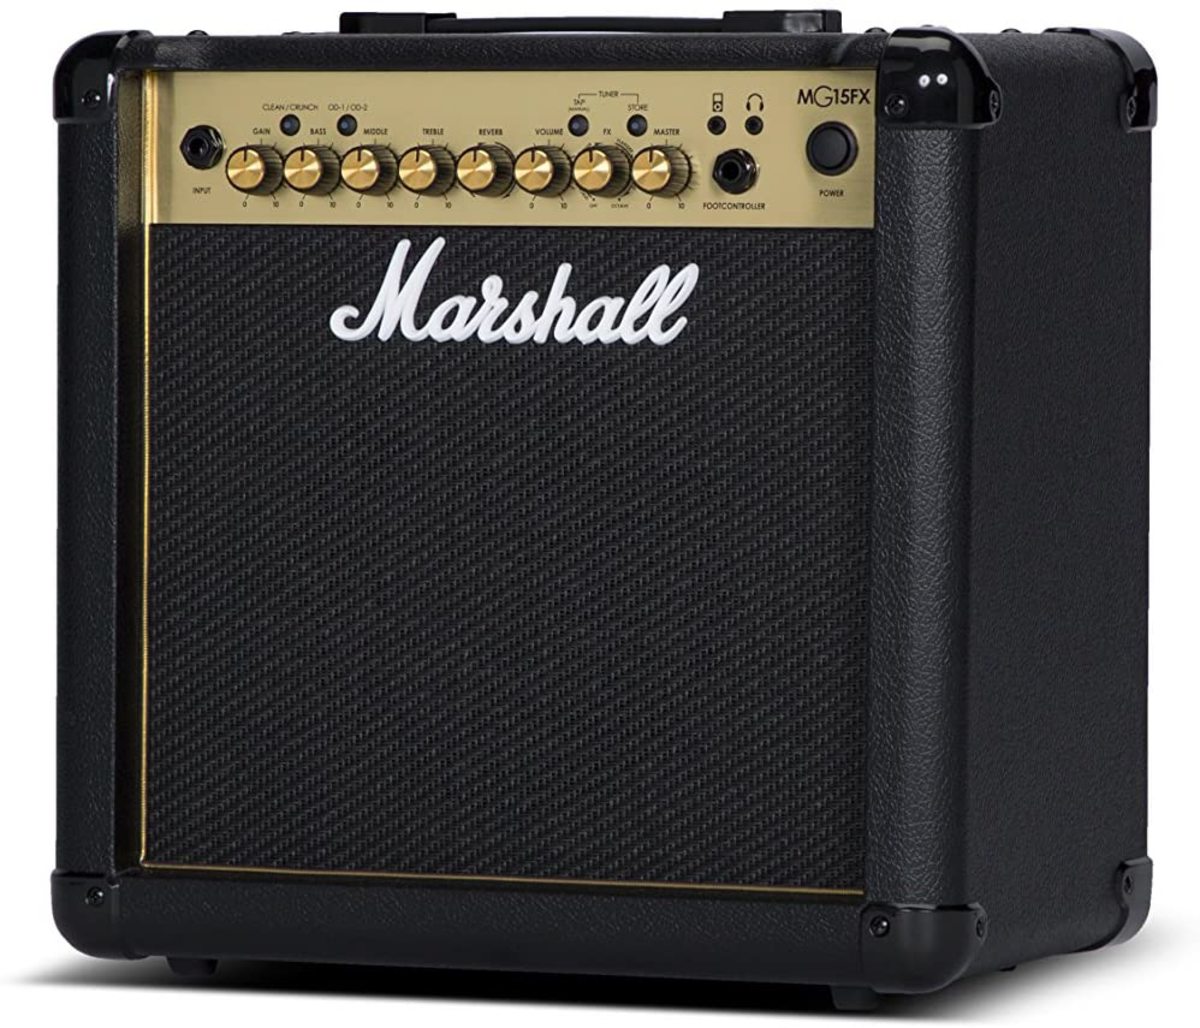 The Marshall MG Gold Series amps offer great sound and features in an affordable package.